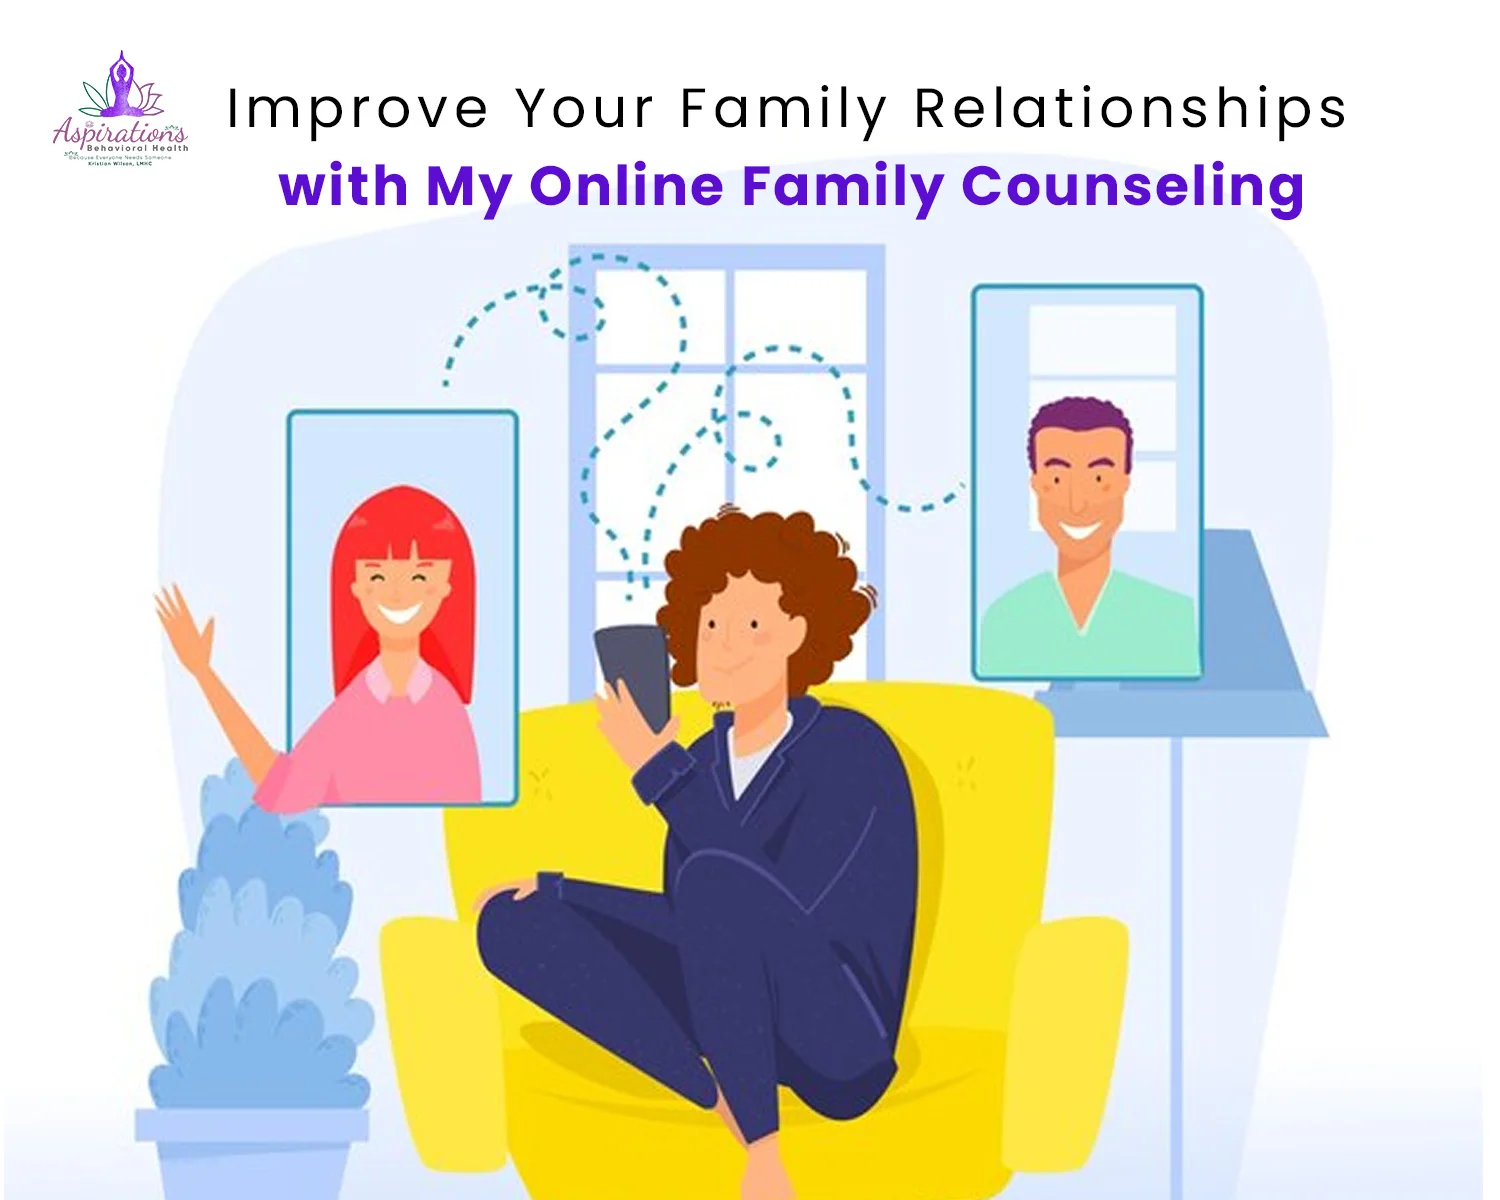 Improve Your Family Relationships with My Online Family Counseling